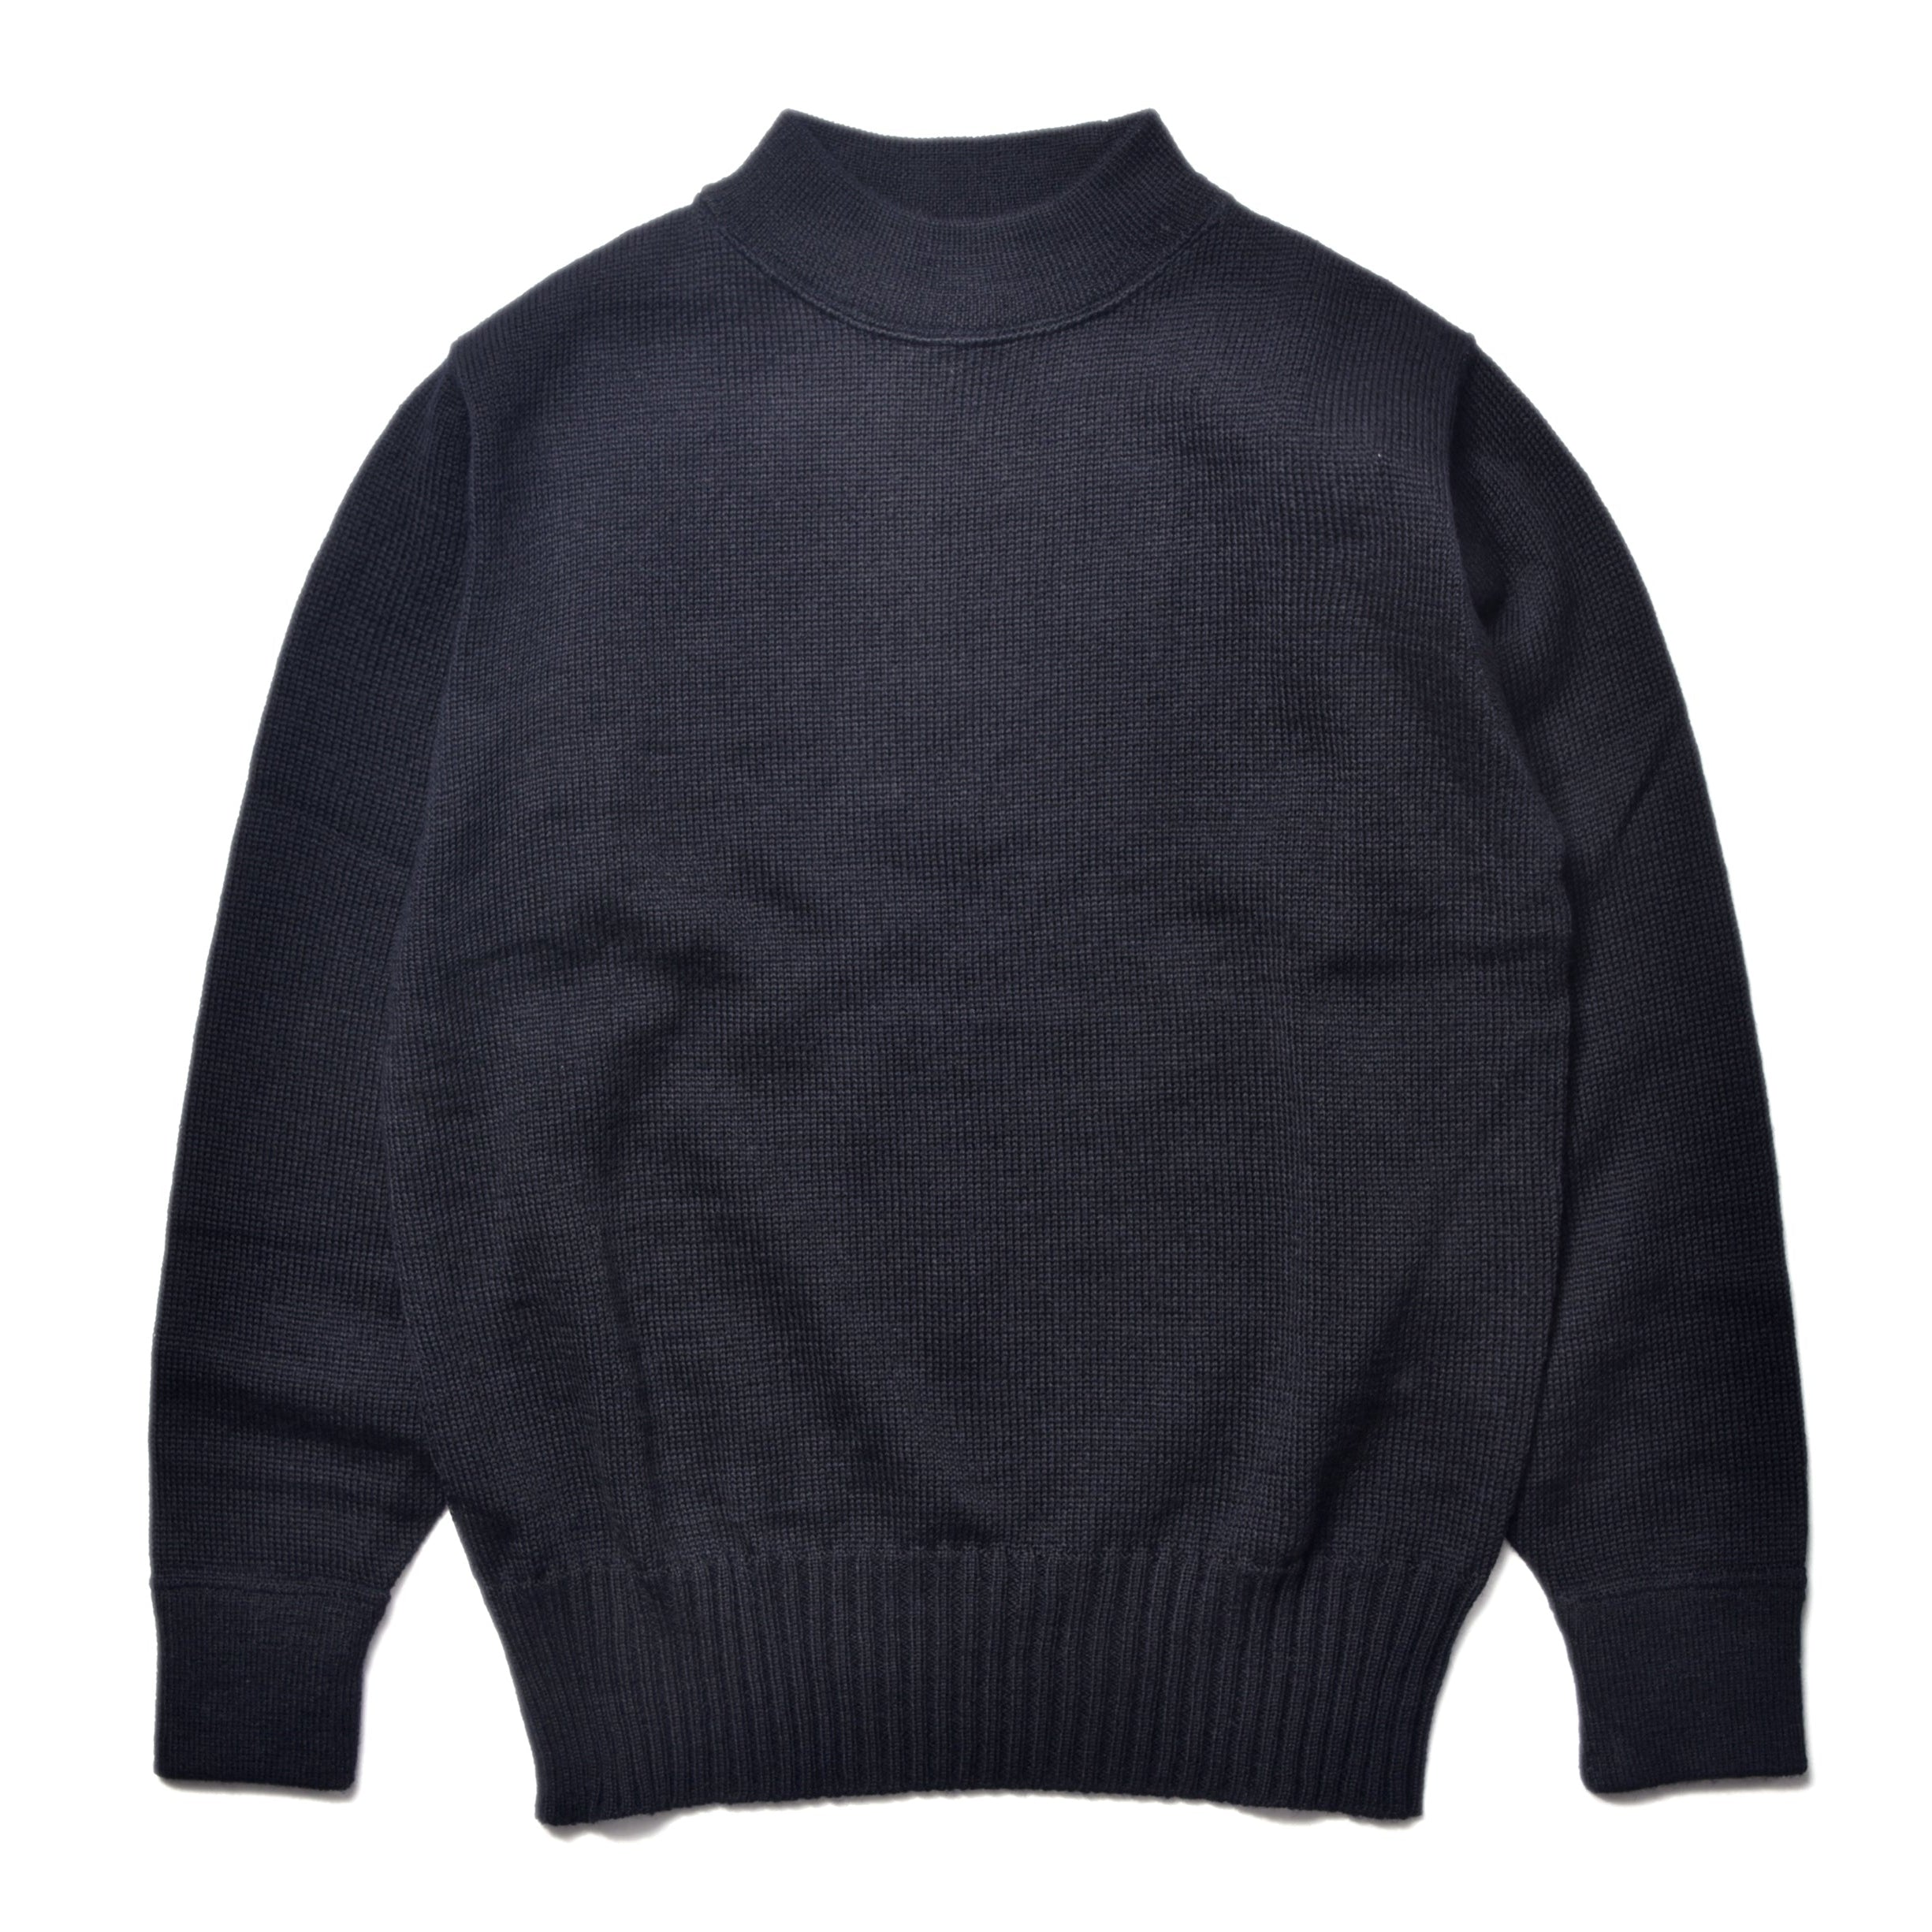 USN WOOL JERSEY – The Real McCoy's